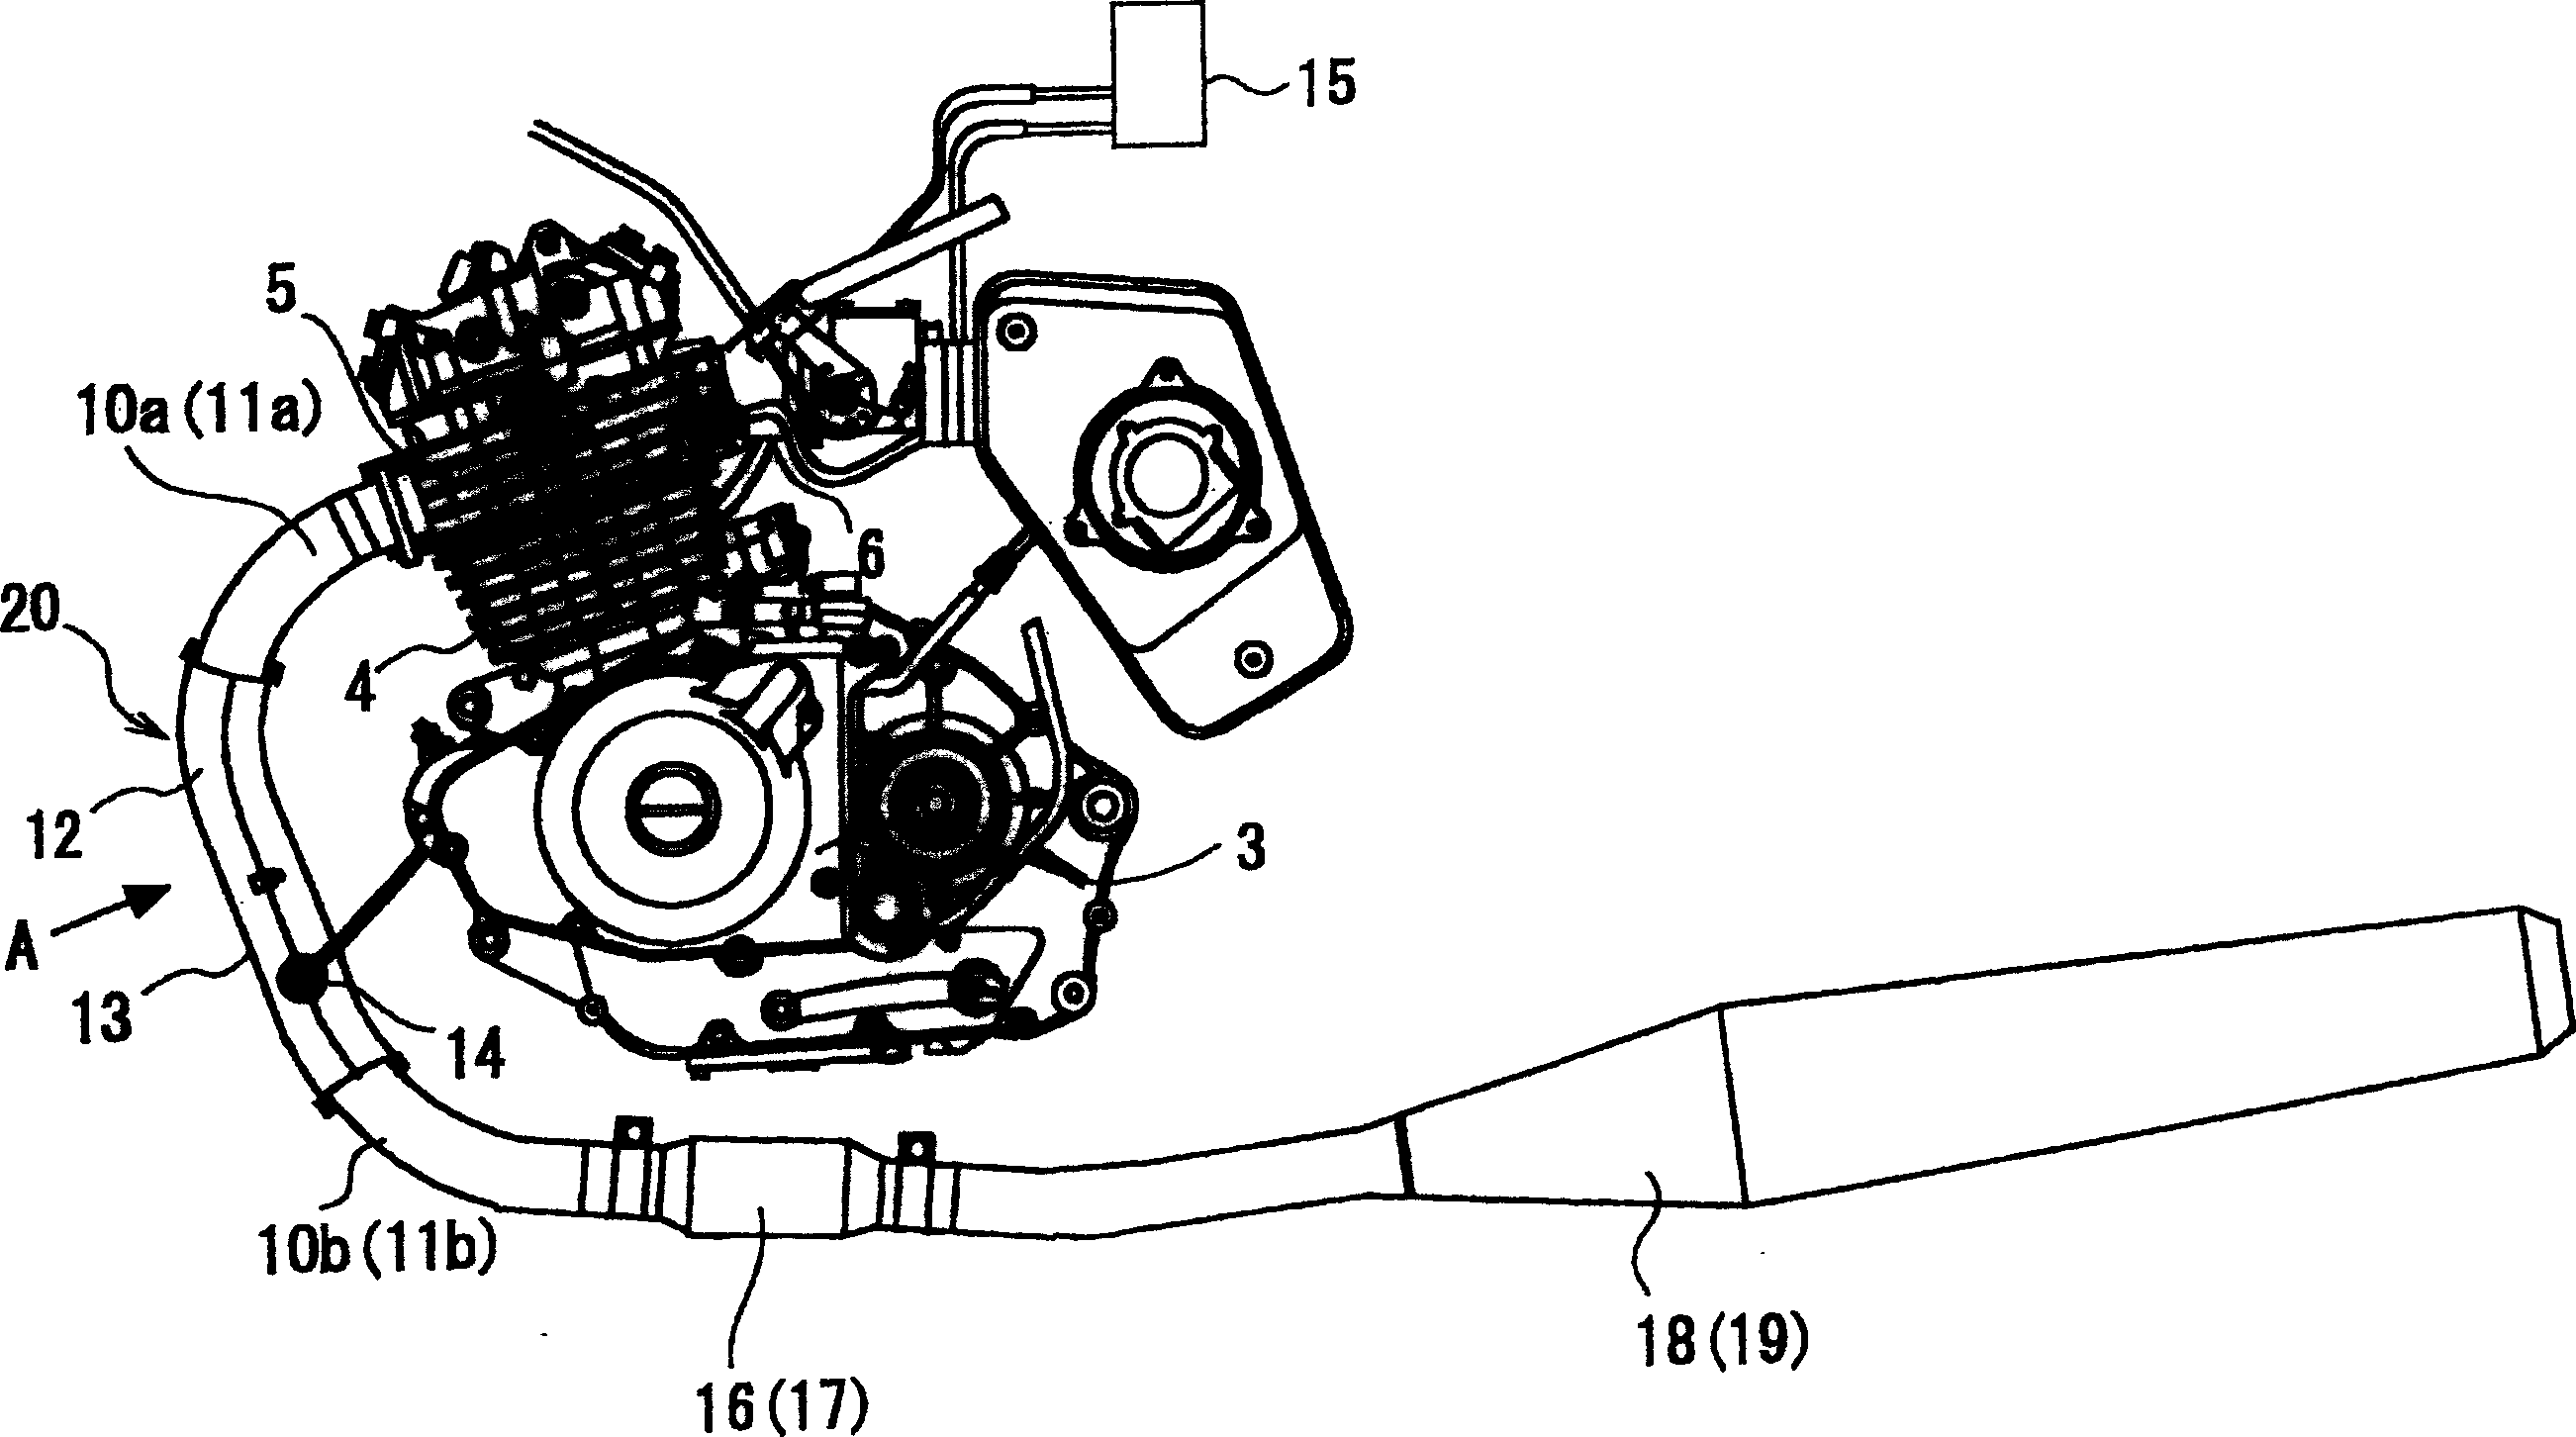 Exhaust pipe structure of automatic two wheel vehicle